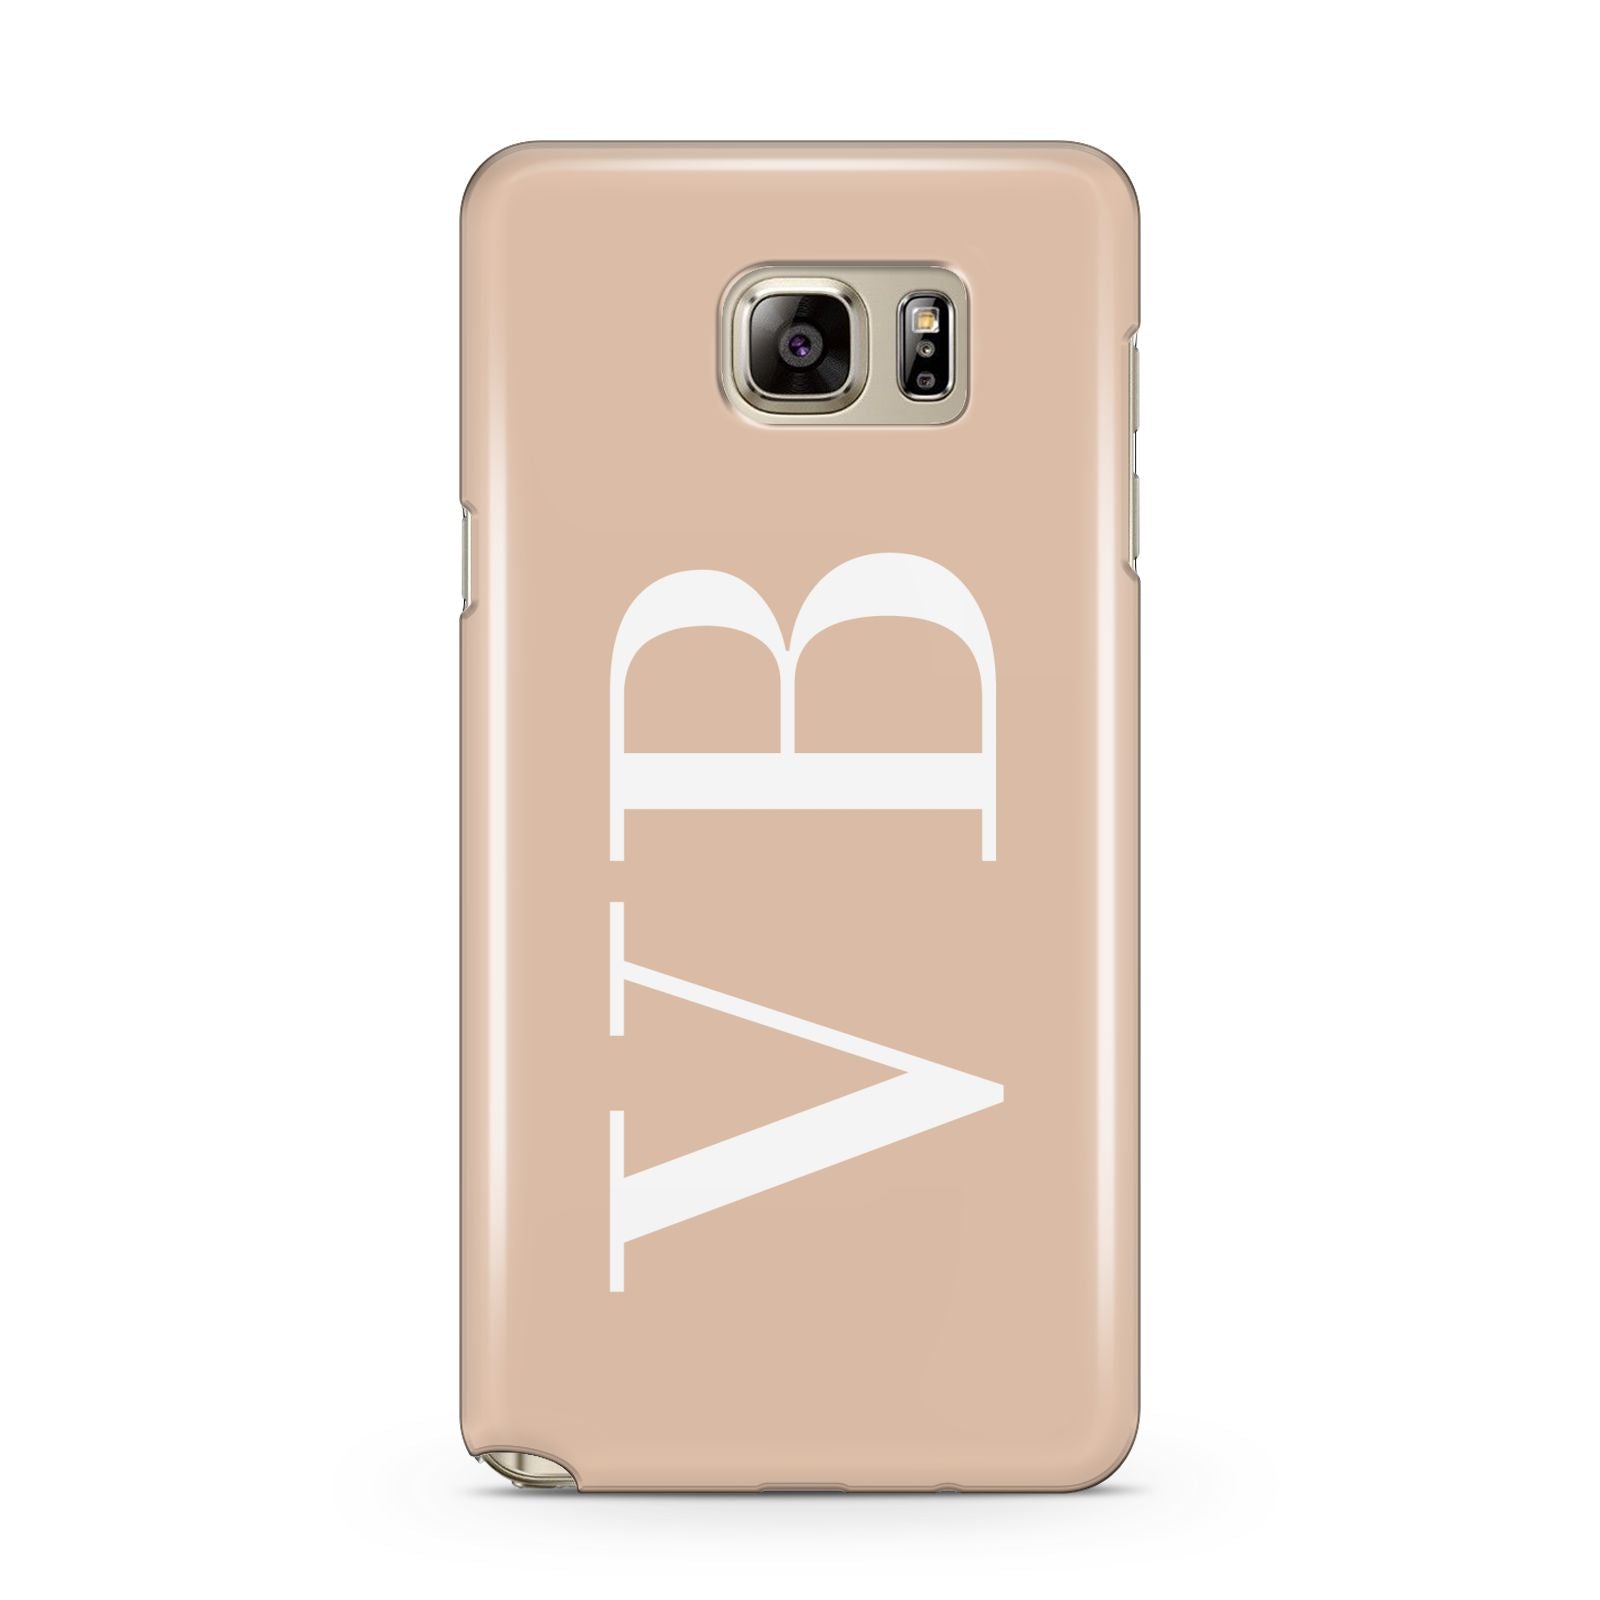 Nude And White Personalised Samsung Galaxy Note 5 Case